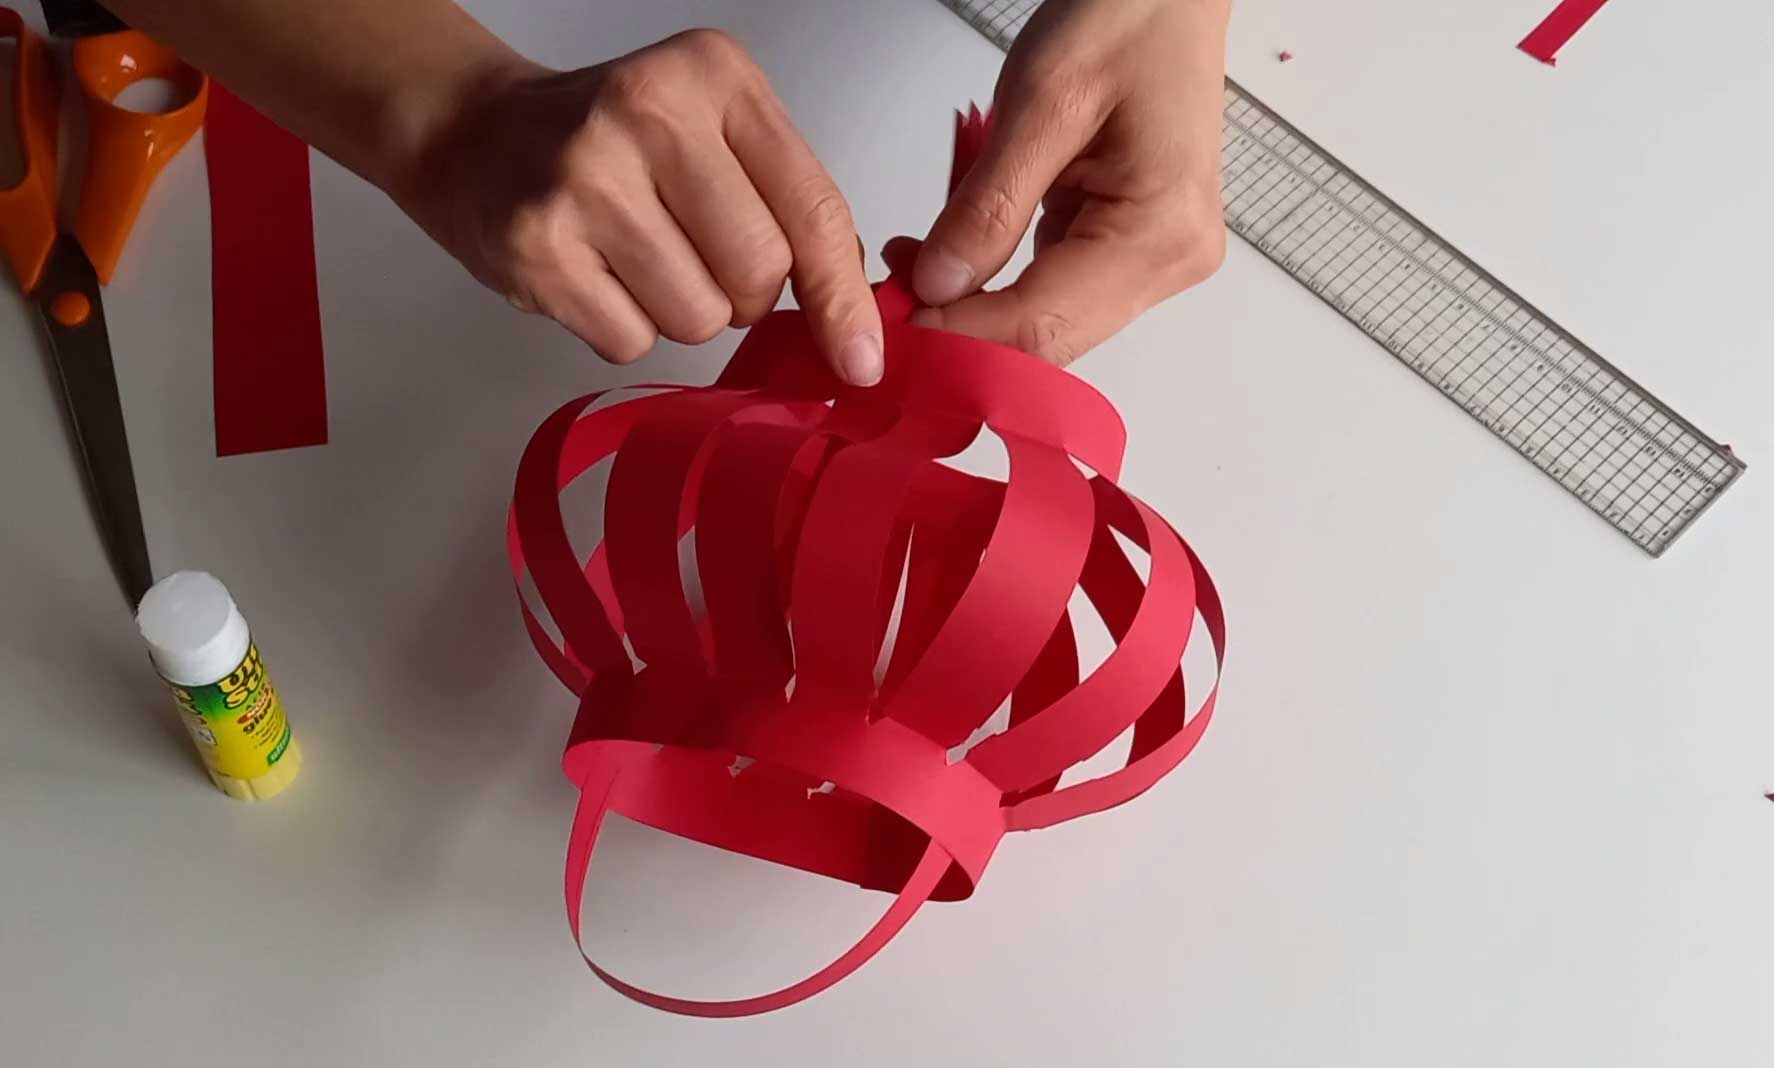 A pair of hands can be seen finishing off making a red cardboard lunar lantern on a table-top next to a glue-stick, ruler and pair of scissors.